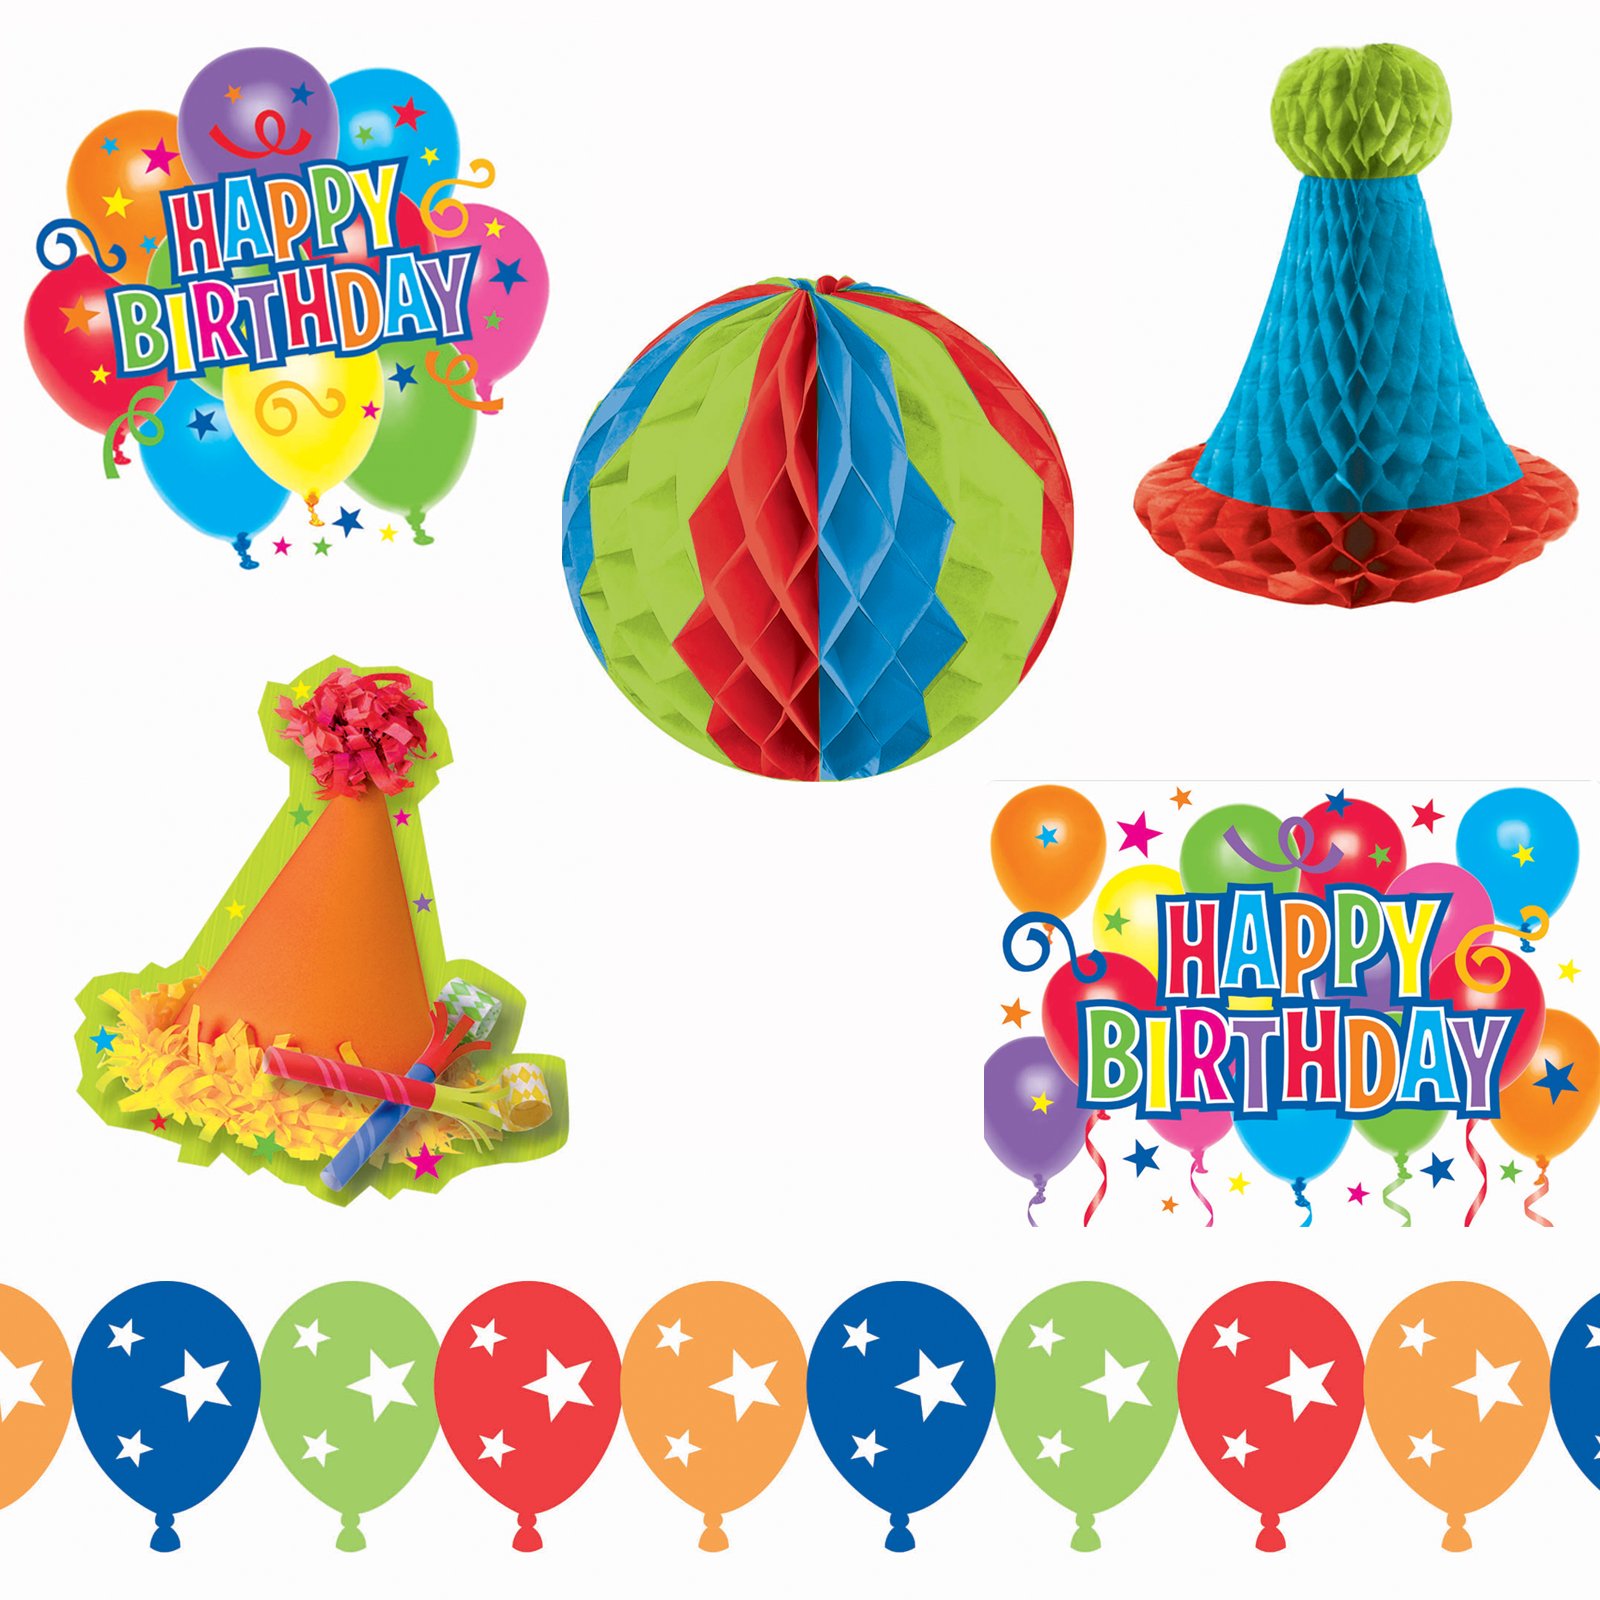 Everything for a party for a birthday free image download